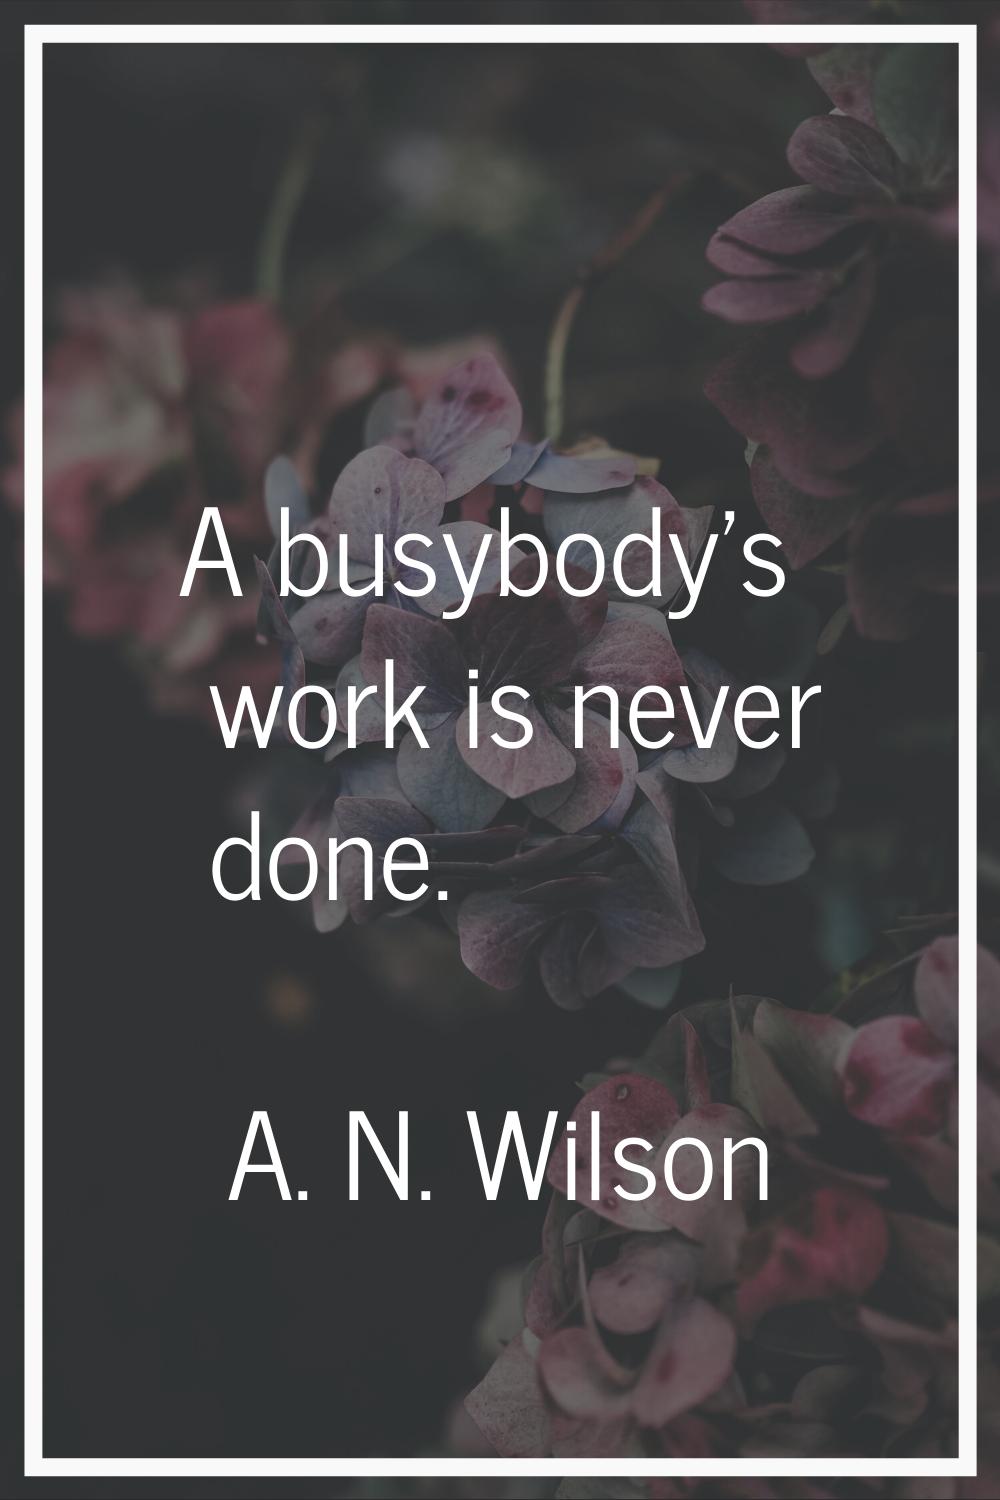 A busybody's work is never done.